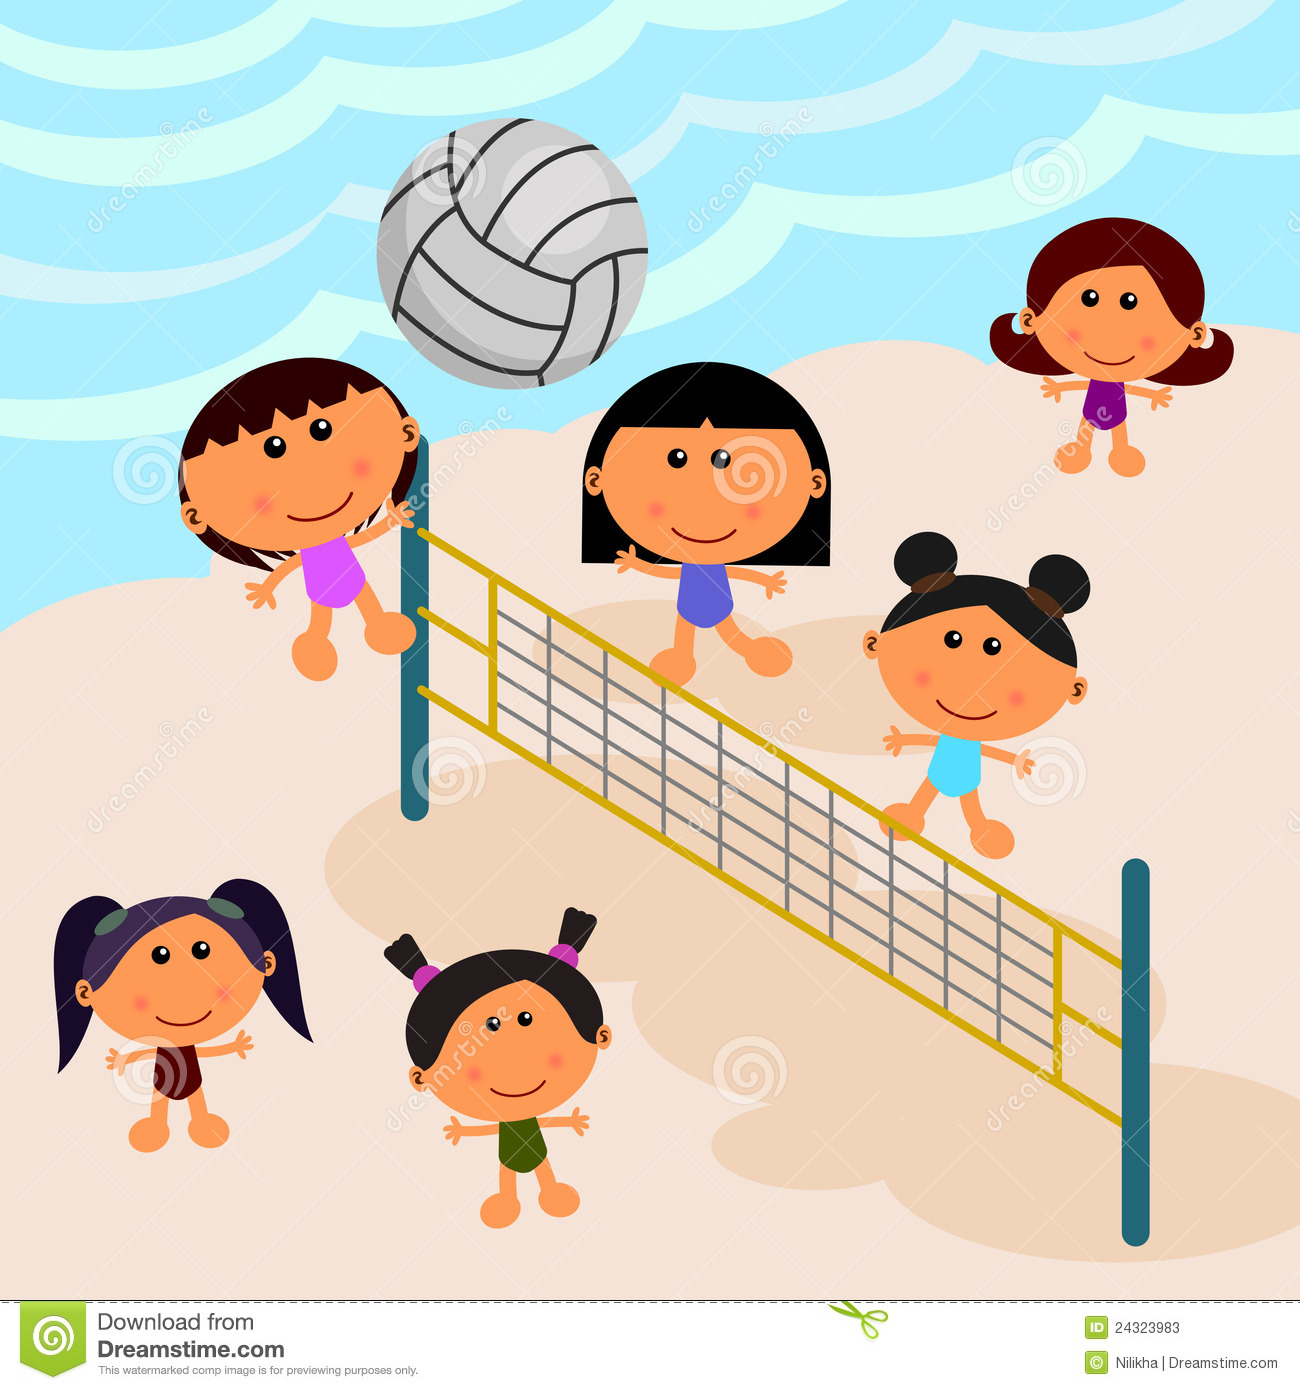 volleyball game clipart - photo #17